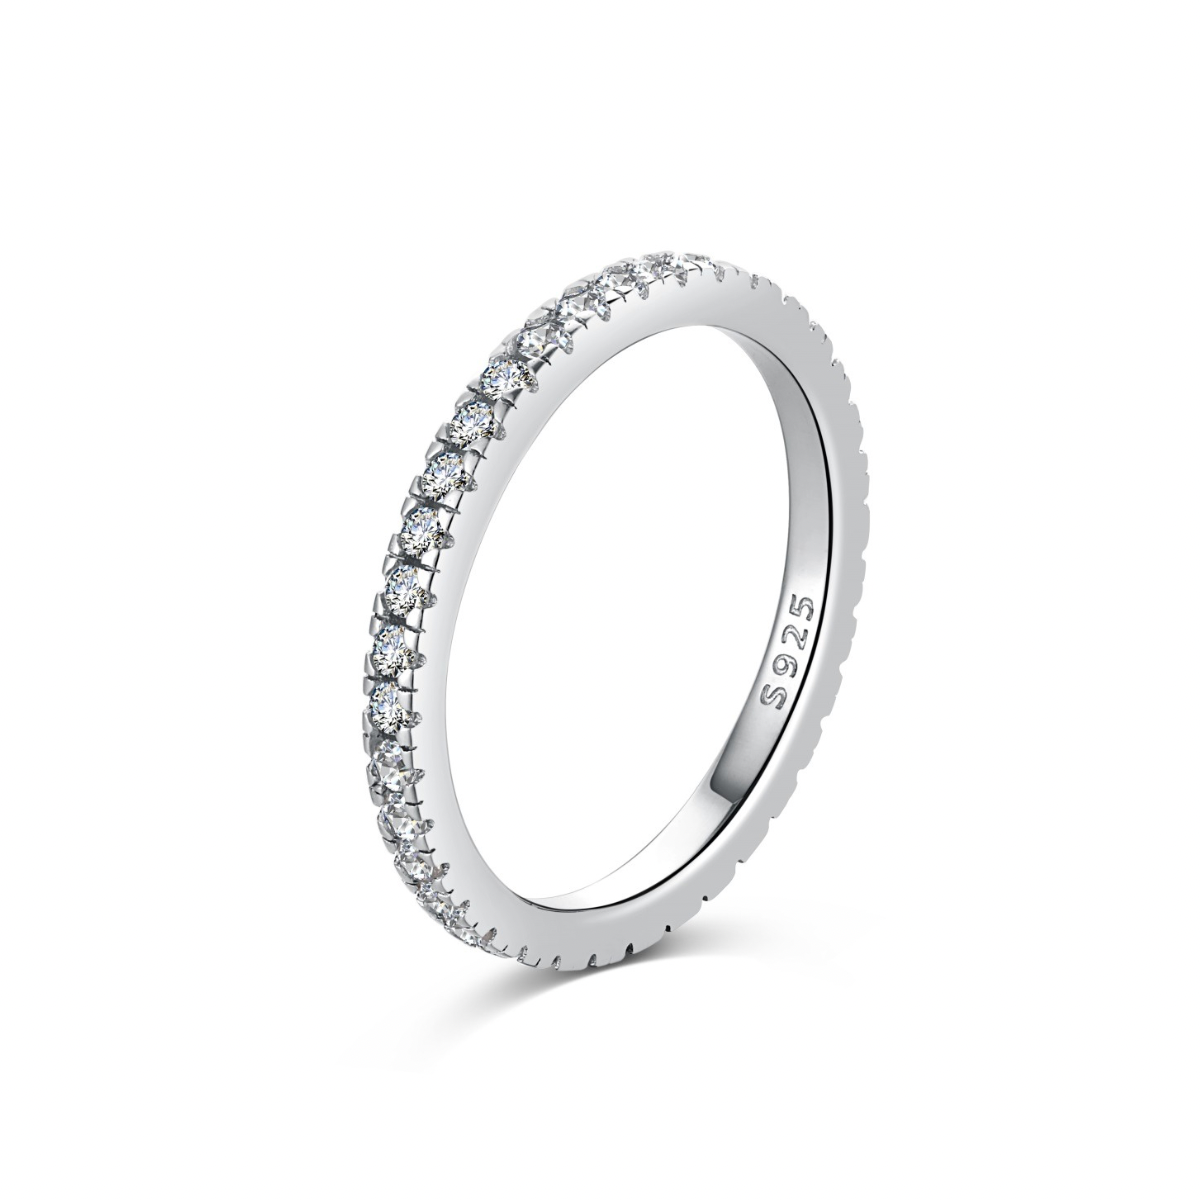 Sterling Silver ‘Emry’ Eternity Ring